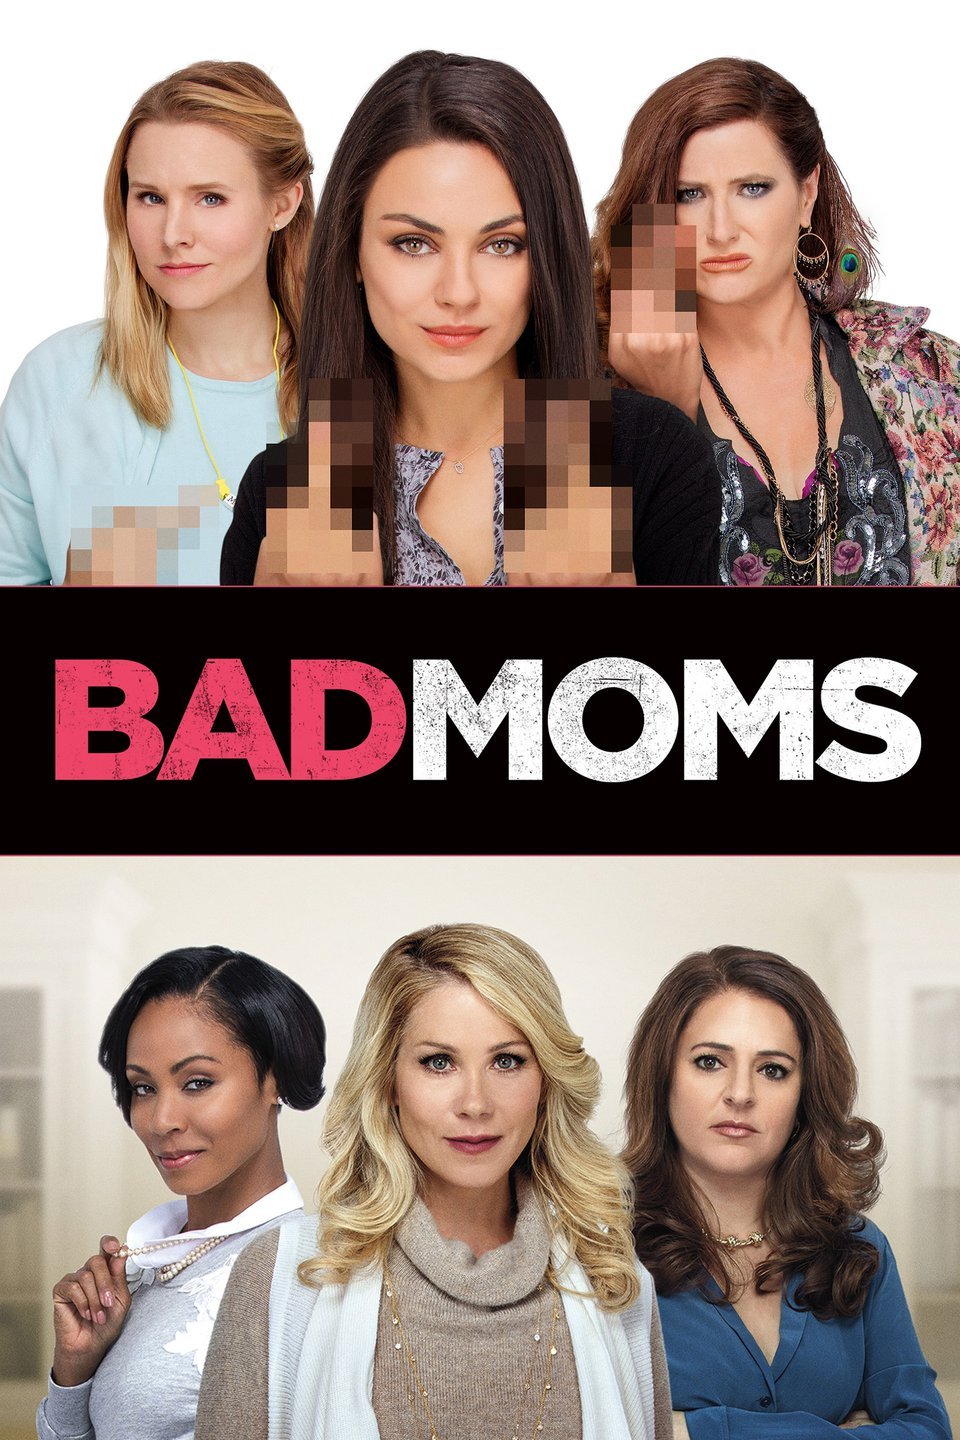 Bad Moms Trailer 2 Trailers & Videos Rotten Tomatoes